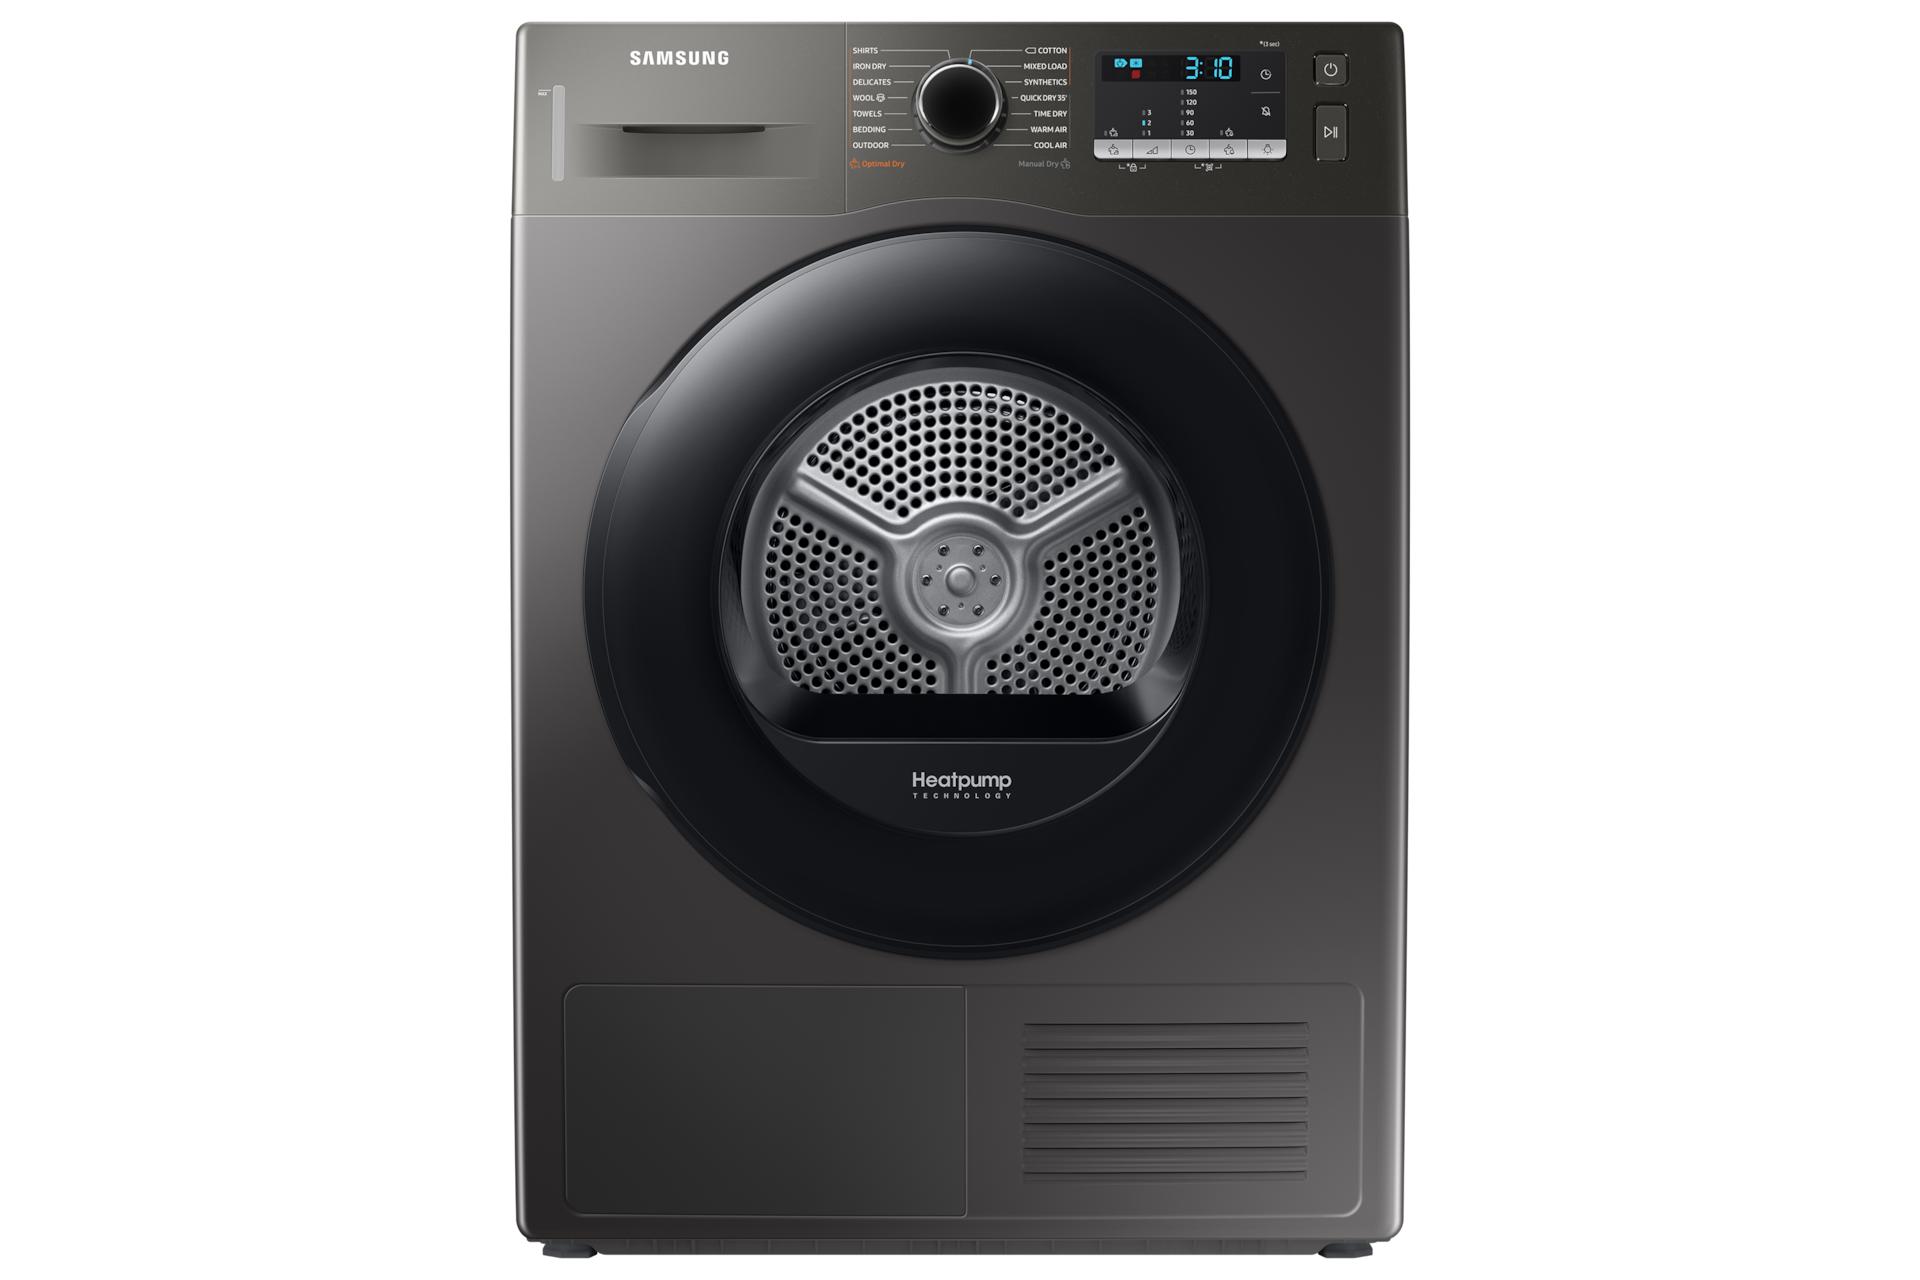 Samsung 8kg Tumble Dryer with Heat Pump Technology and Sensor Drying, DV80TA020AN in Inox